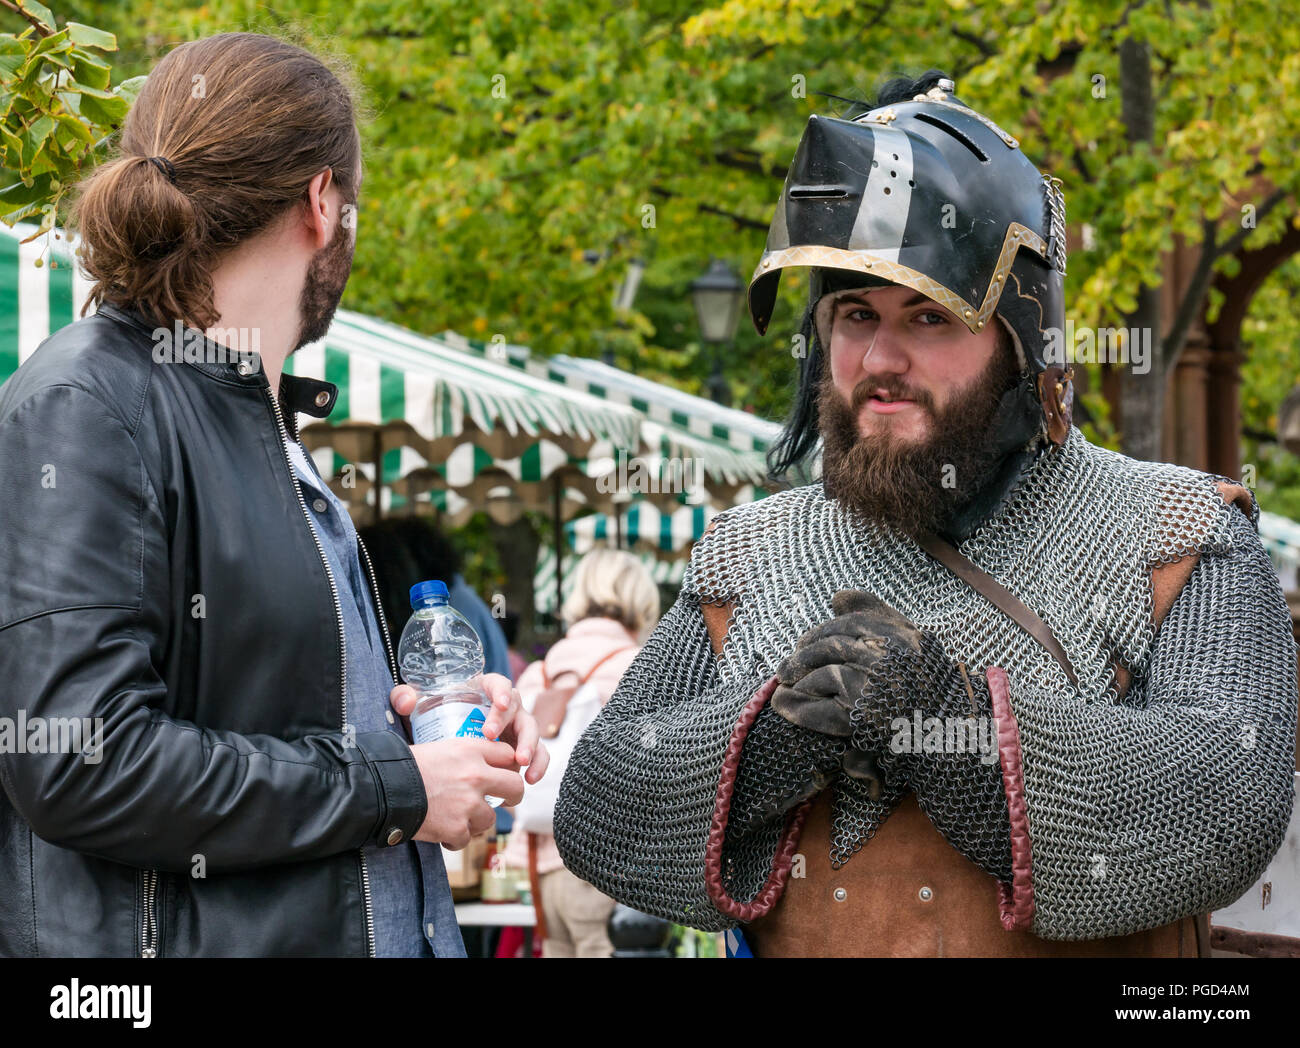 Haddington, Scotland, UK. 25th August 2018. Haddington 700 Celebrations Medieval Big Day, The Medieval Day is the highlight of Haddington 700 events taking place in 2018 to celebrate the granting of a charter by Robert the Bruce to the town in 1318, confirming Haddington's right to hold a market and collect customs. Events across the market town include Medieval children's games and a parade. A man dressed as a Medieval Knight wearing a chainmail top and a pigface bascinet helmet Stock Photo